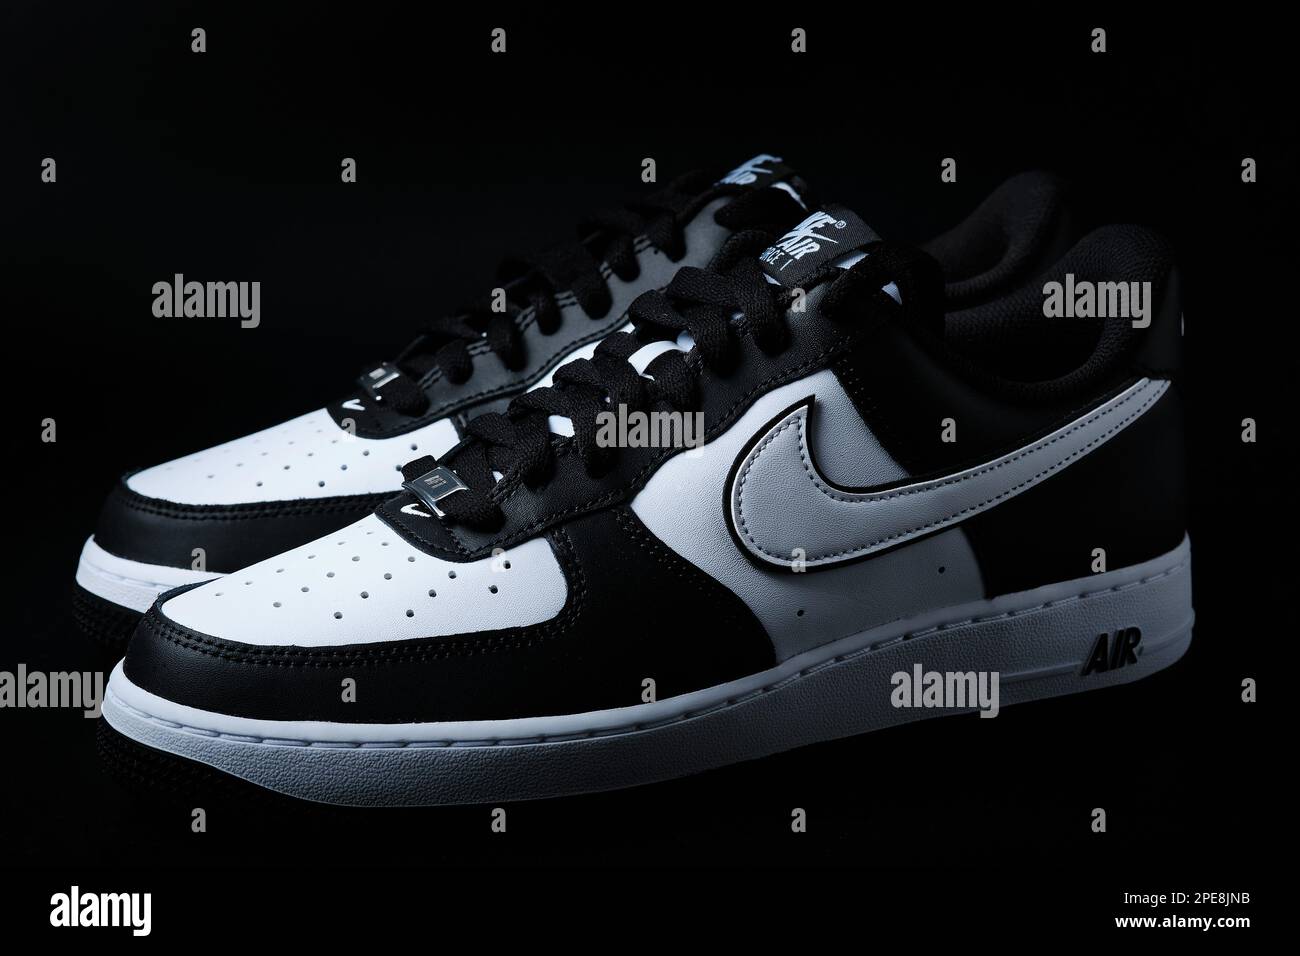 Nike Air Force One Lows on black Stock Photo - Alamy